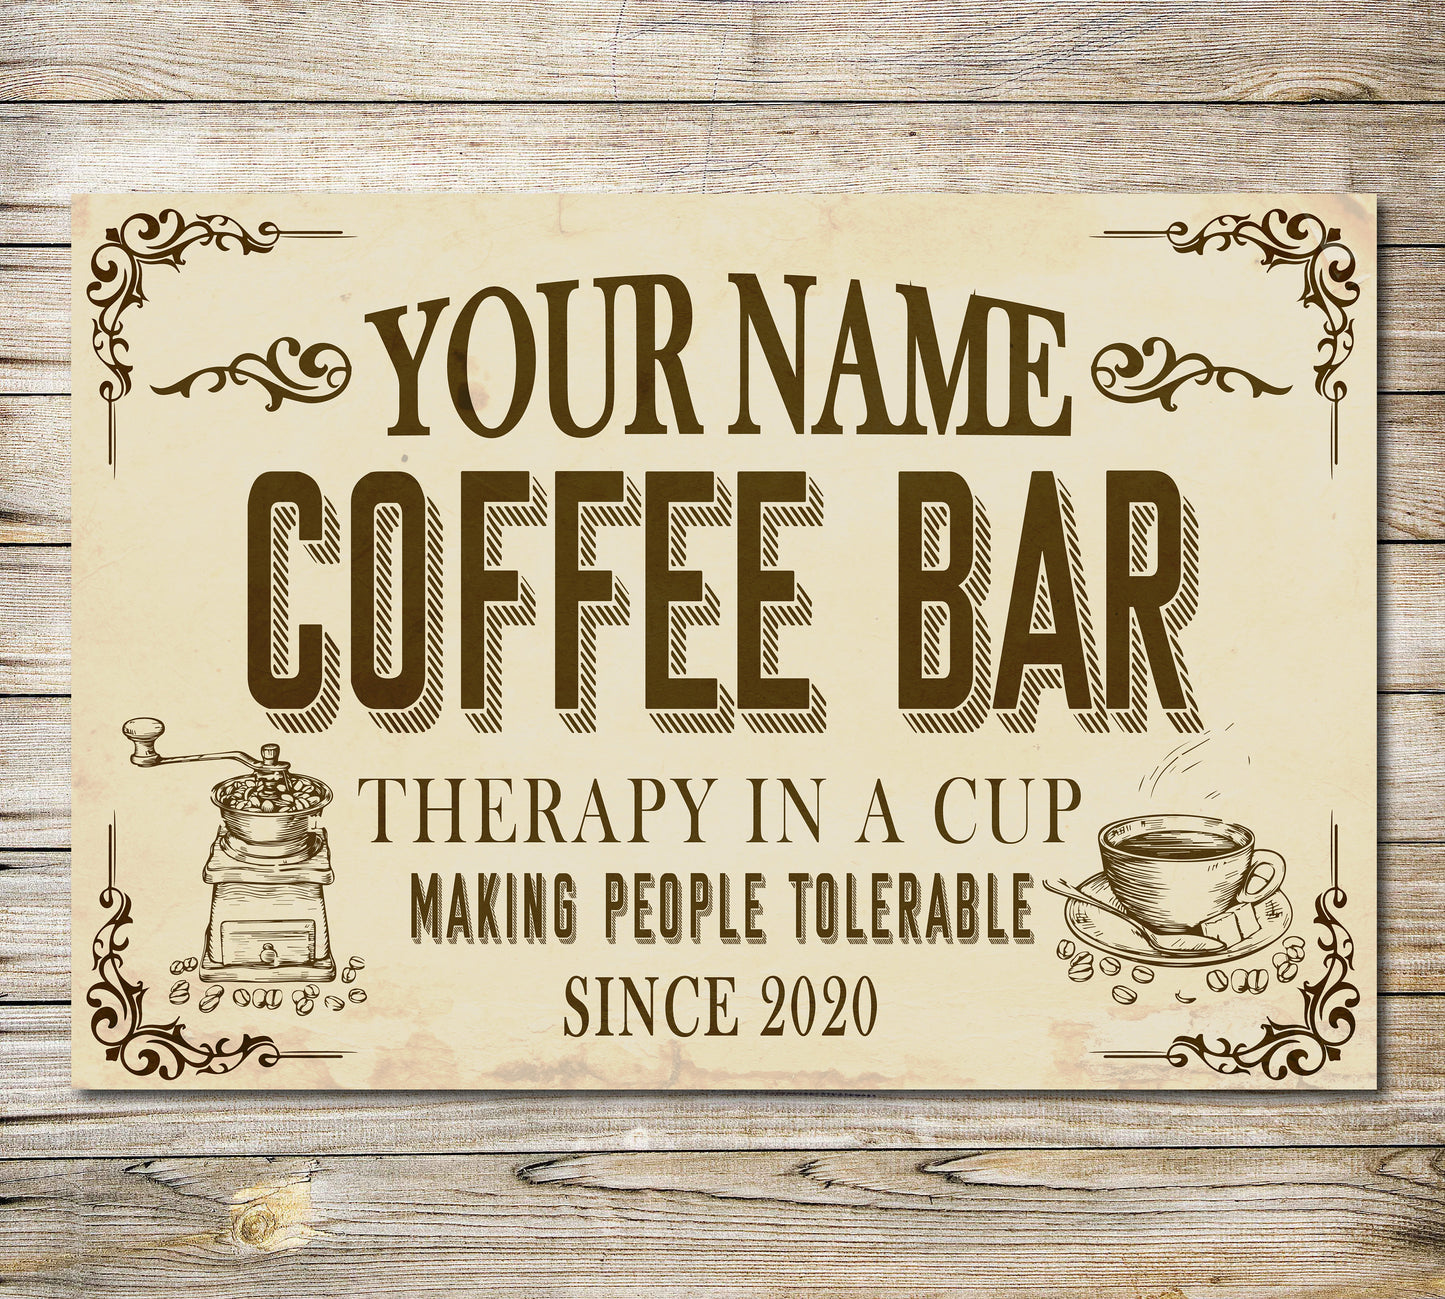 PERSONALISED Coffee Sign Bar Decor Home Decor Kitchen Sign Metal Plaque Gift 0214